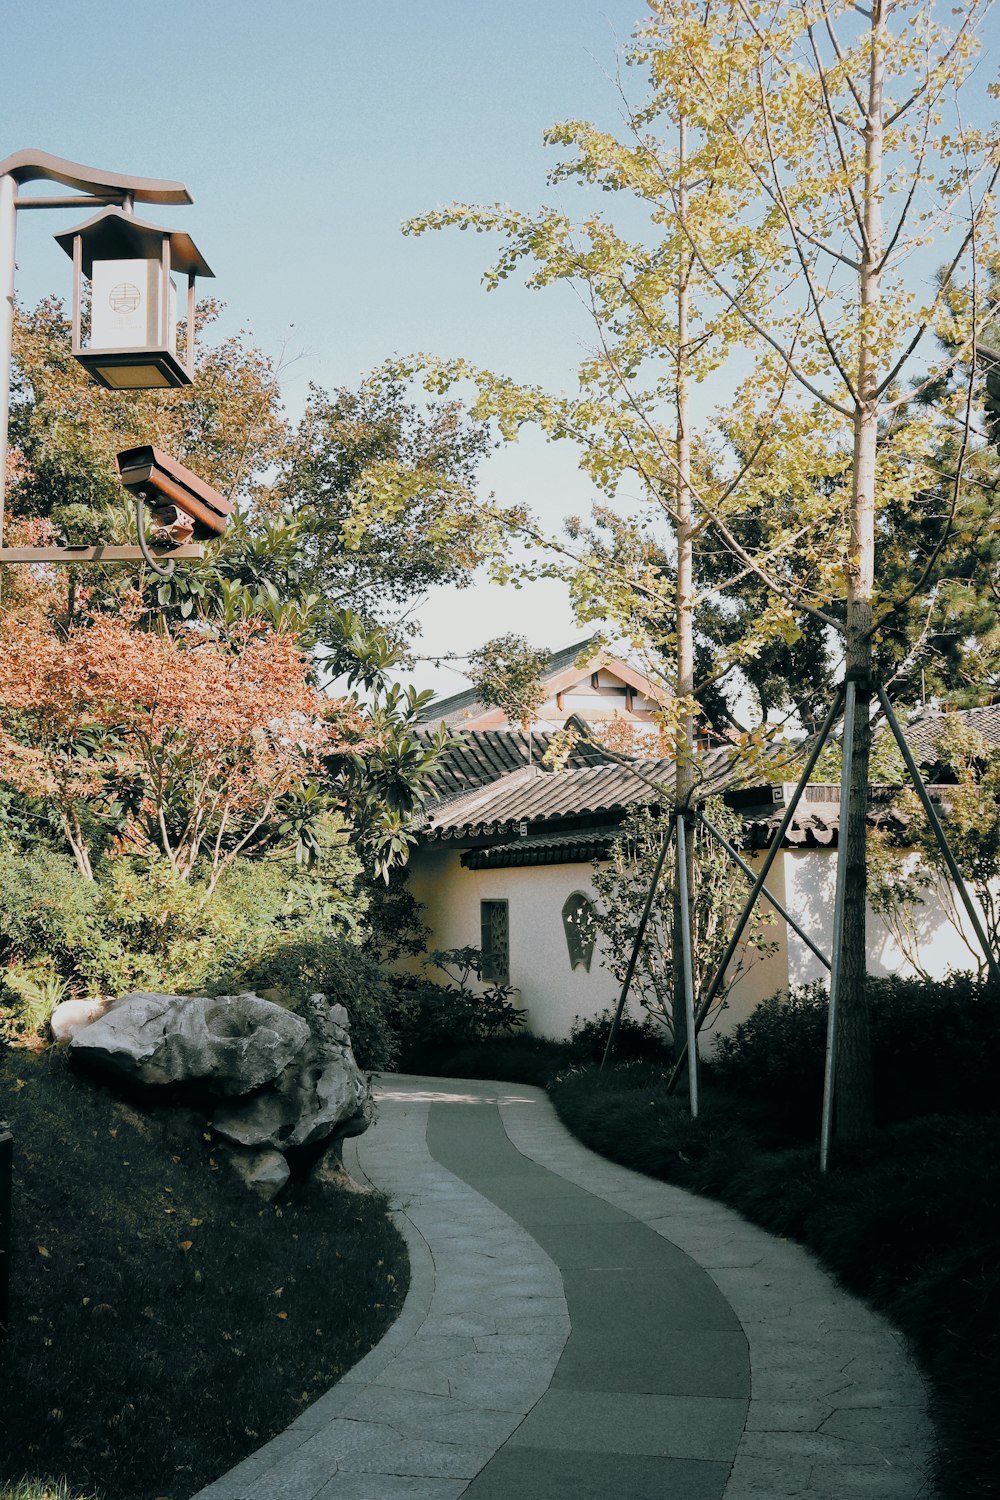 a path leading to a building with a clock tower in the background